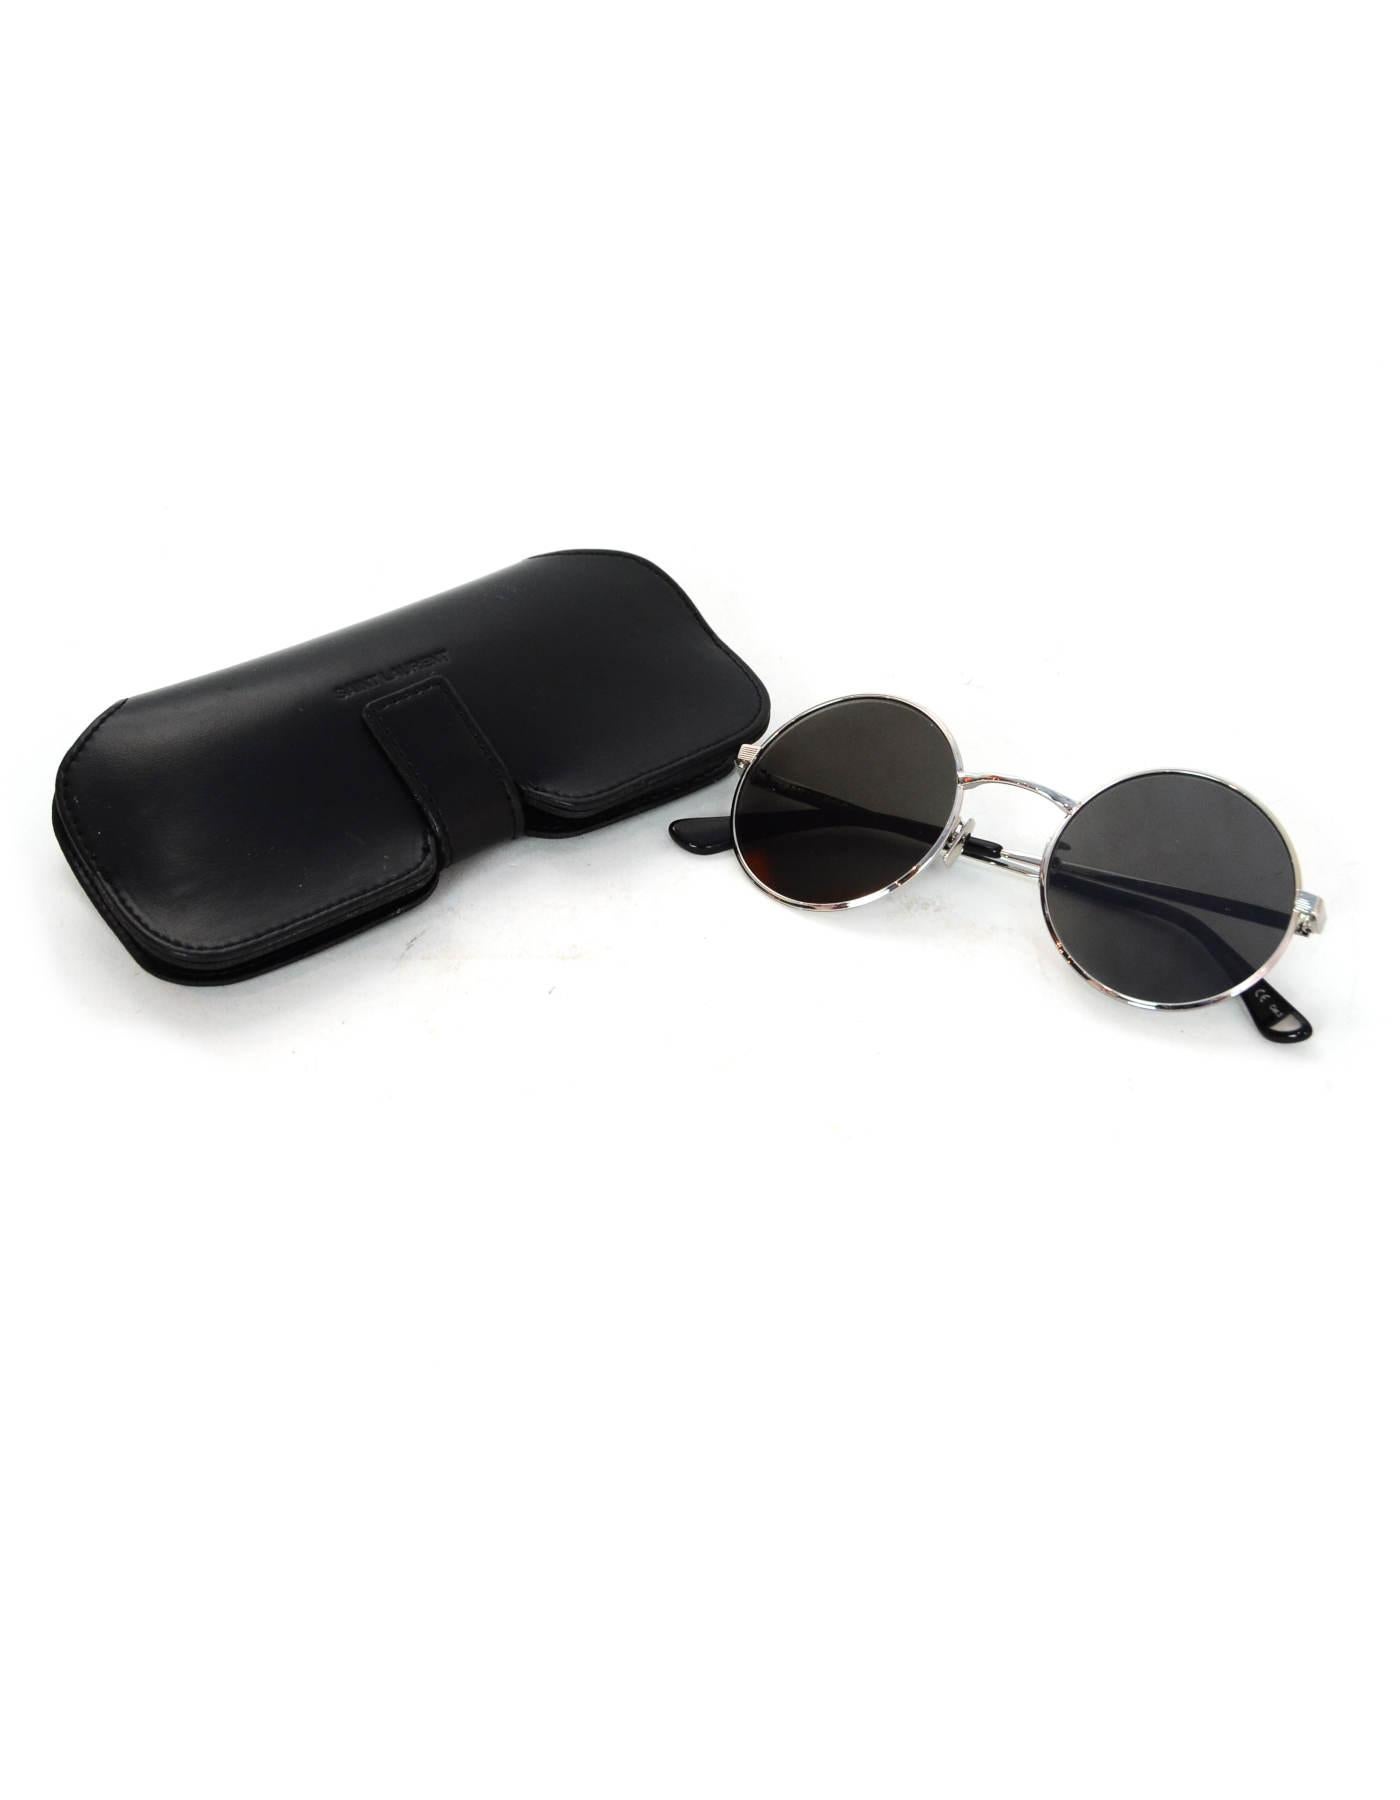 Saint Laurent YSL Black/Silver SL 136 Zero Round Unisex Sunglasses W/ Case

Made In: Italy 
Color: Black and silver
Hardware: Silvertone
Materials: Metal
Overall Condition: Excellent pre-owned condition  
Estimated Retail: $405 + tax
Includes: